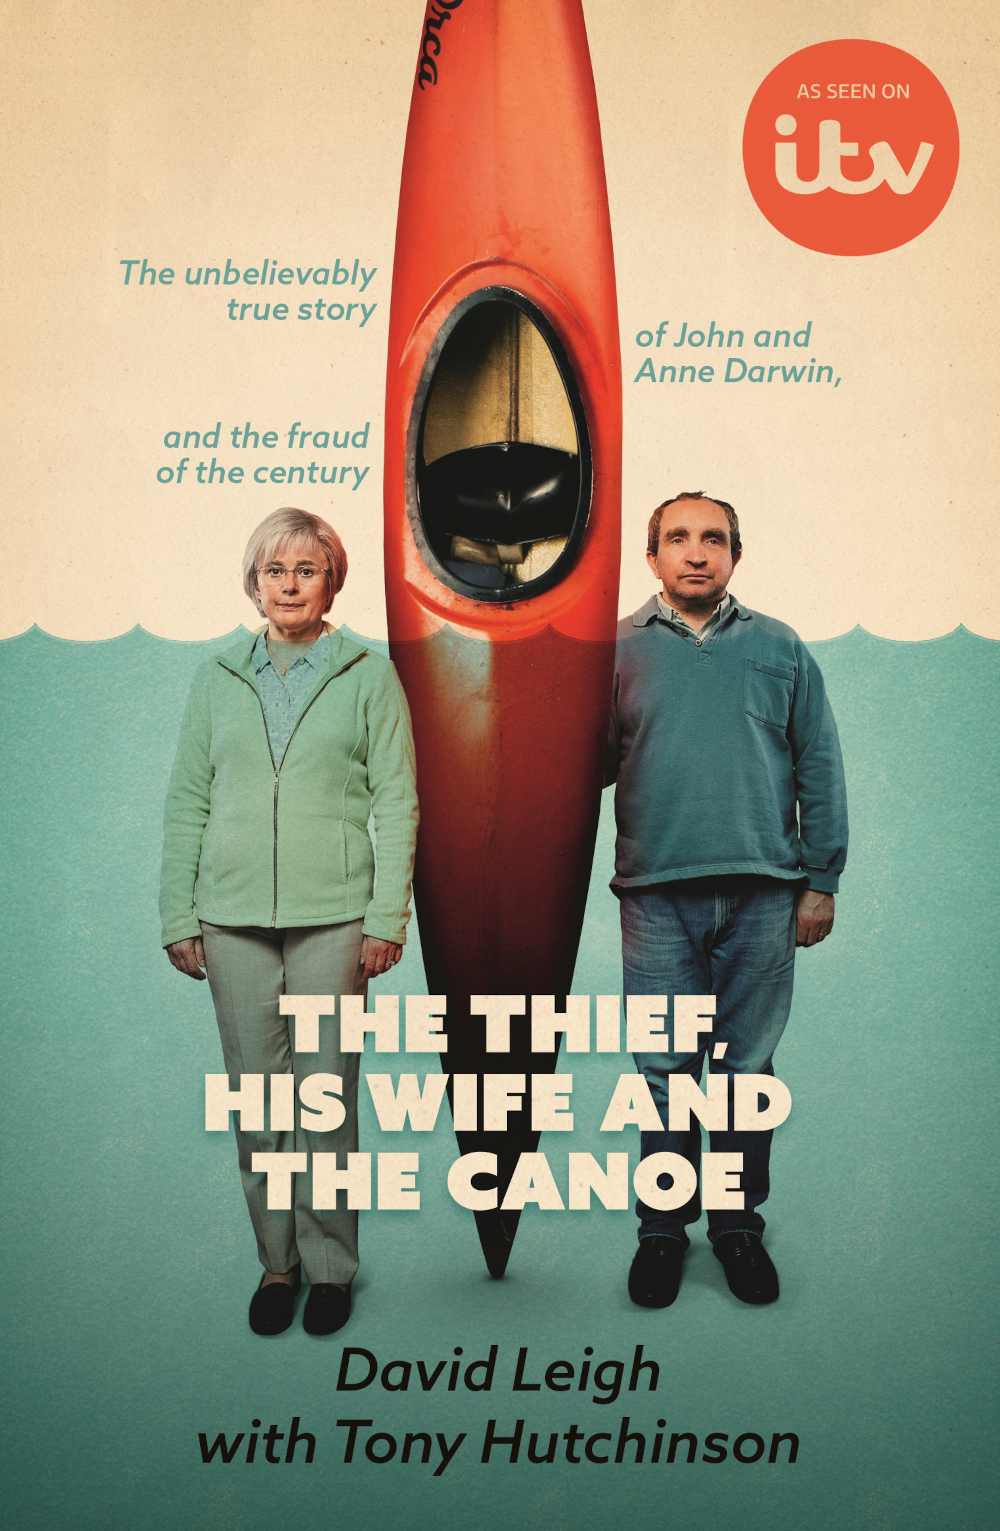 The thief, his wife and the canoe book cover.